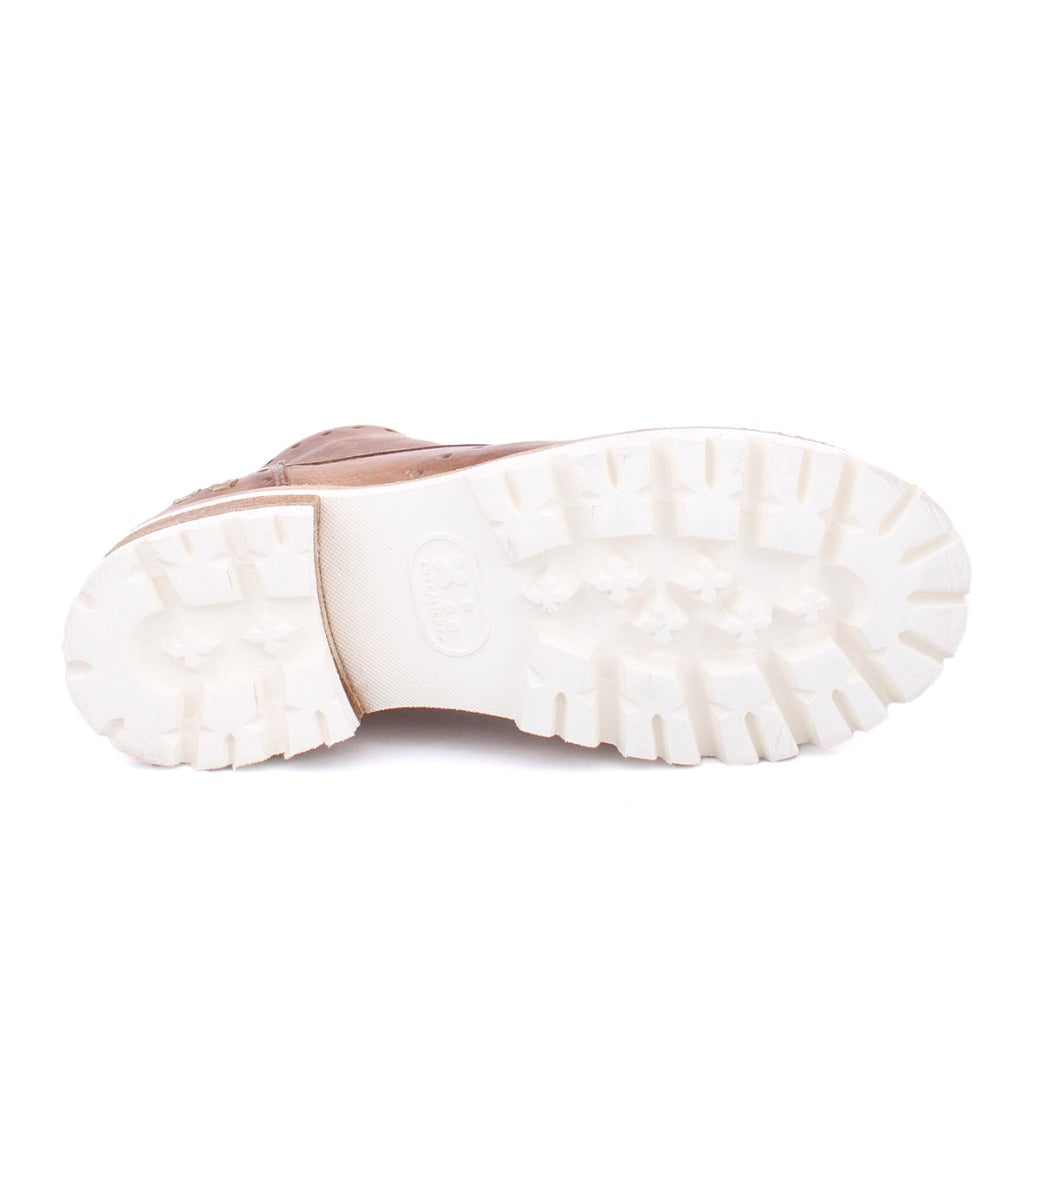 A women's Quatro III shoe with white soles on a white background by Bed Stu.